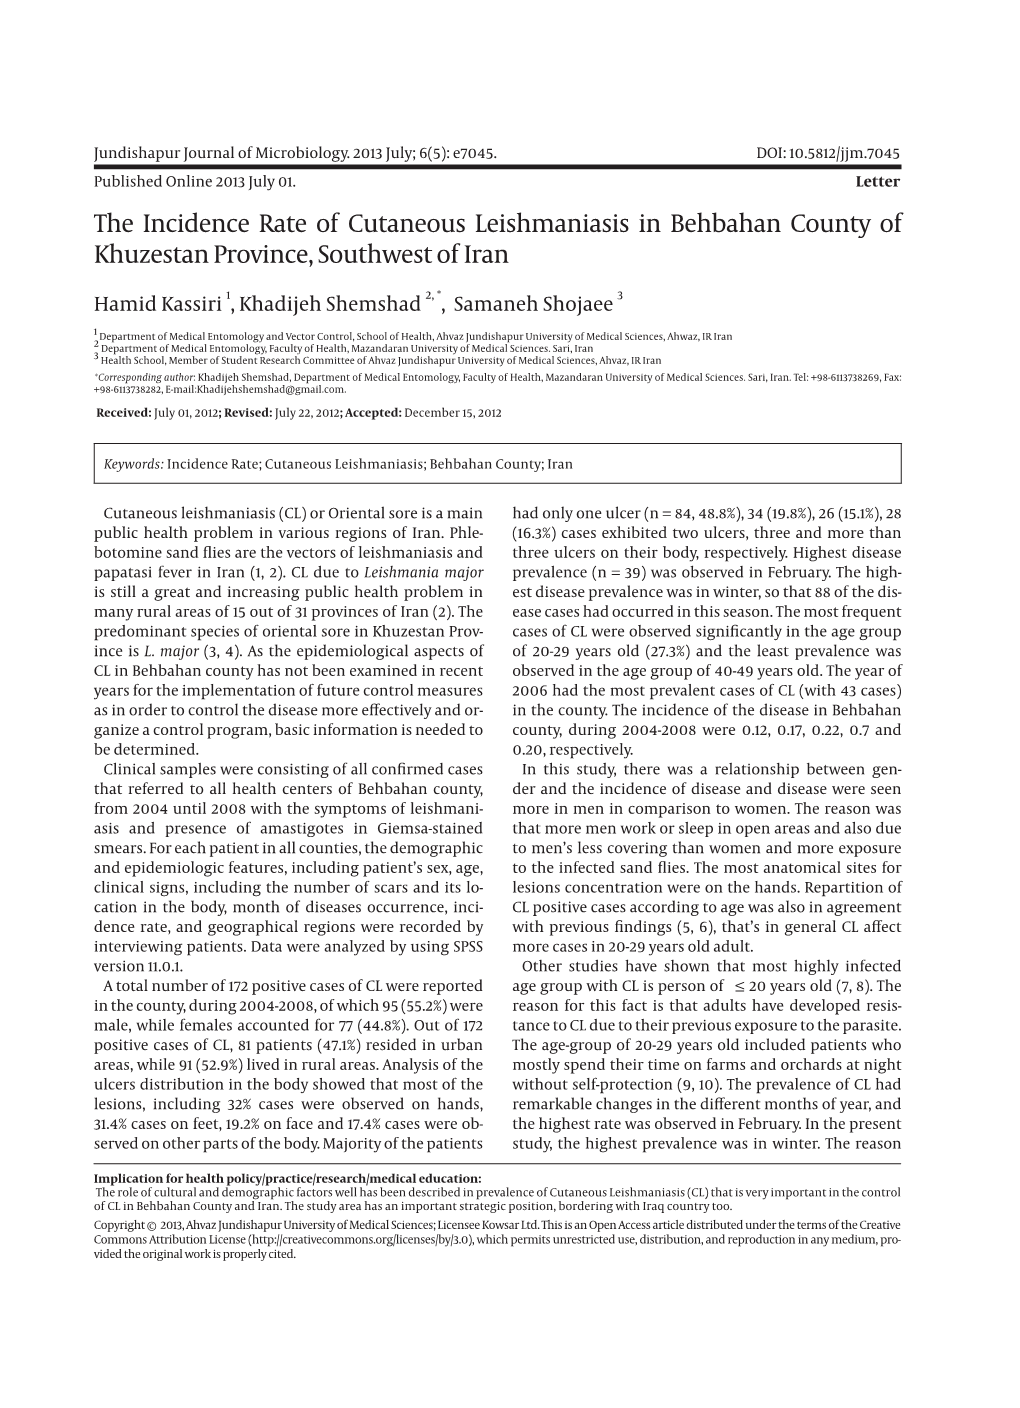 The Incidence Rate of Cutaneous Leishmaniasis in Behbahan County of Khuzestan Province, Southwest of Iran